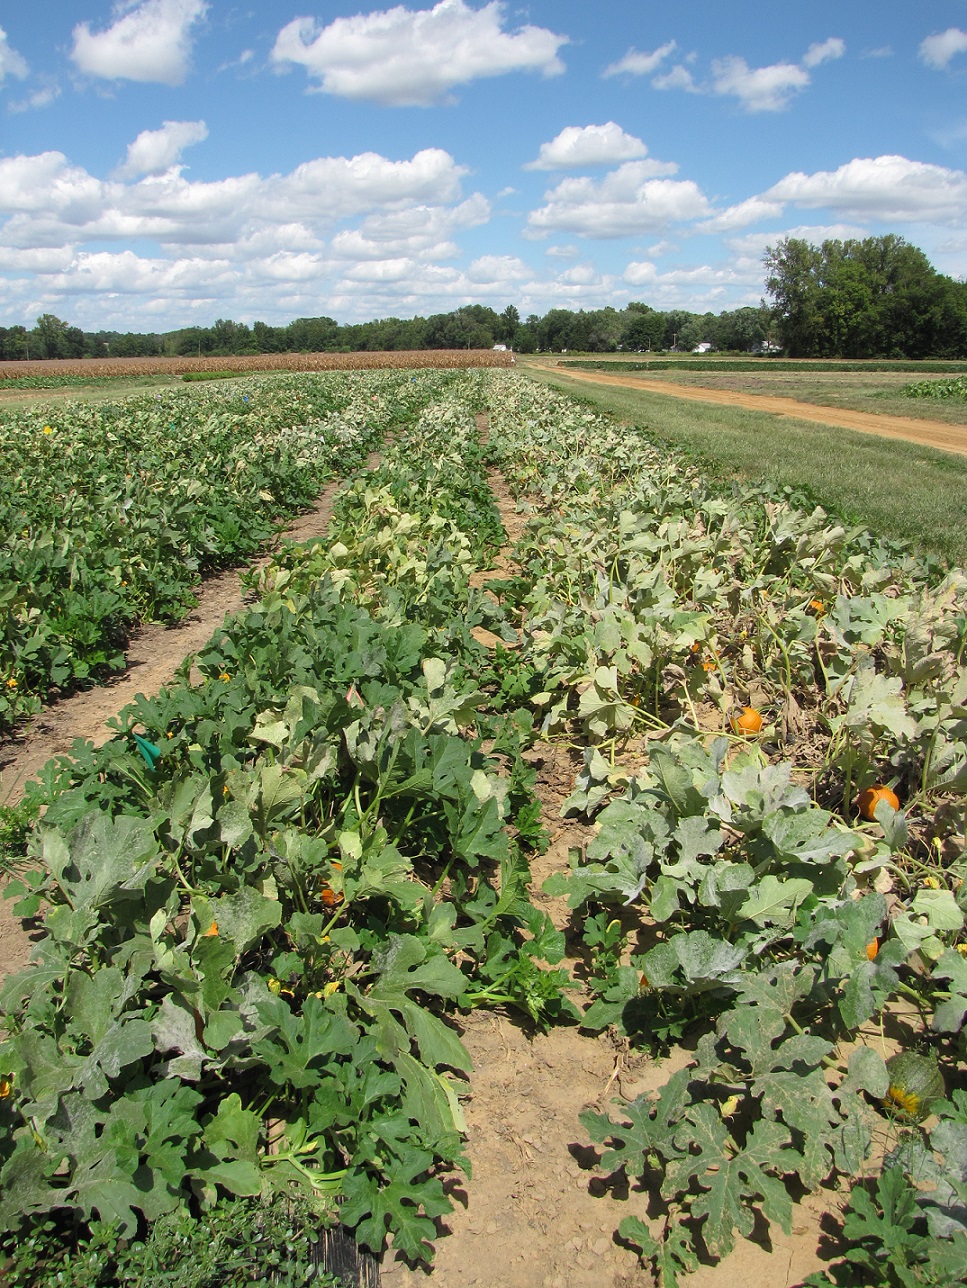 Figure 2. A fungicide trial for products for powdery mildew of pumpkin.  The untreated row on the right has significant symptoms of powdery mildew.  The adjacent row to the left has been treated with a systemic fungicide and has relatively mild symptoms.  